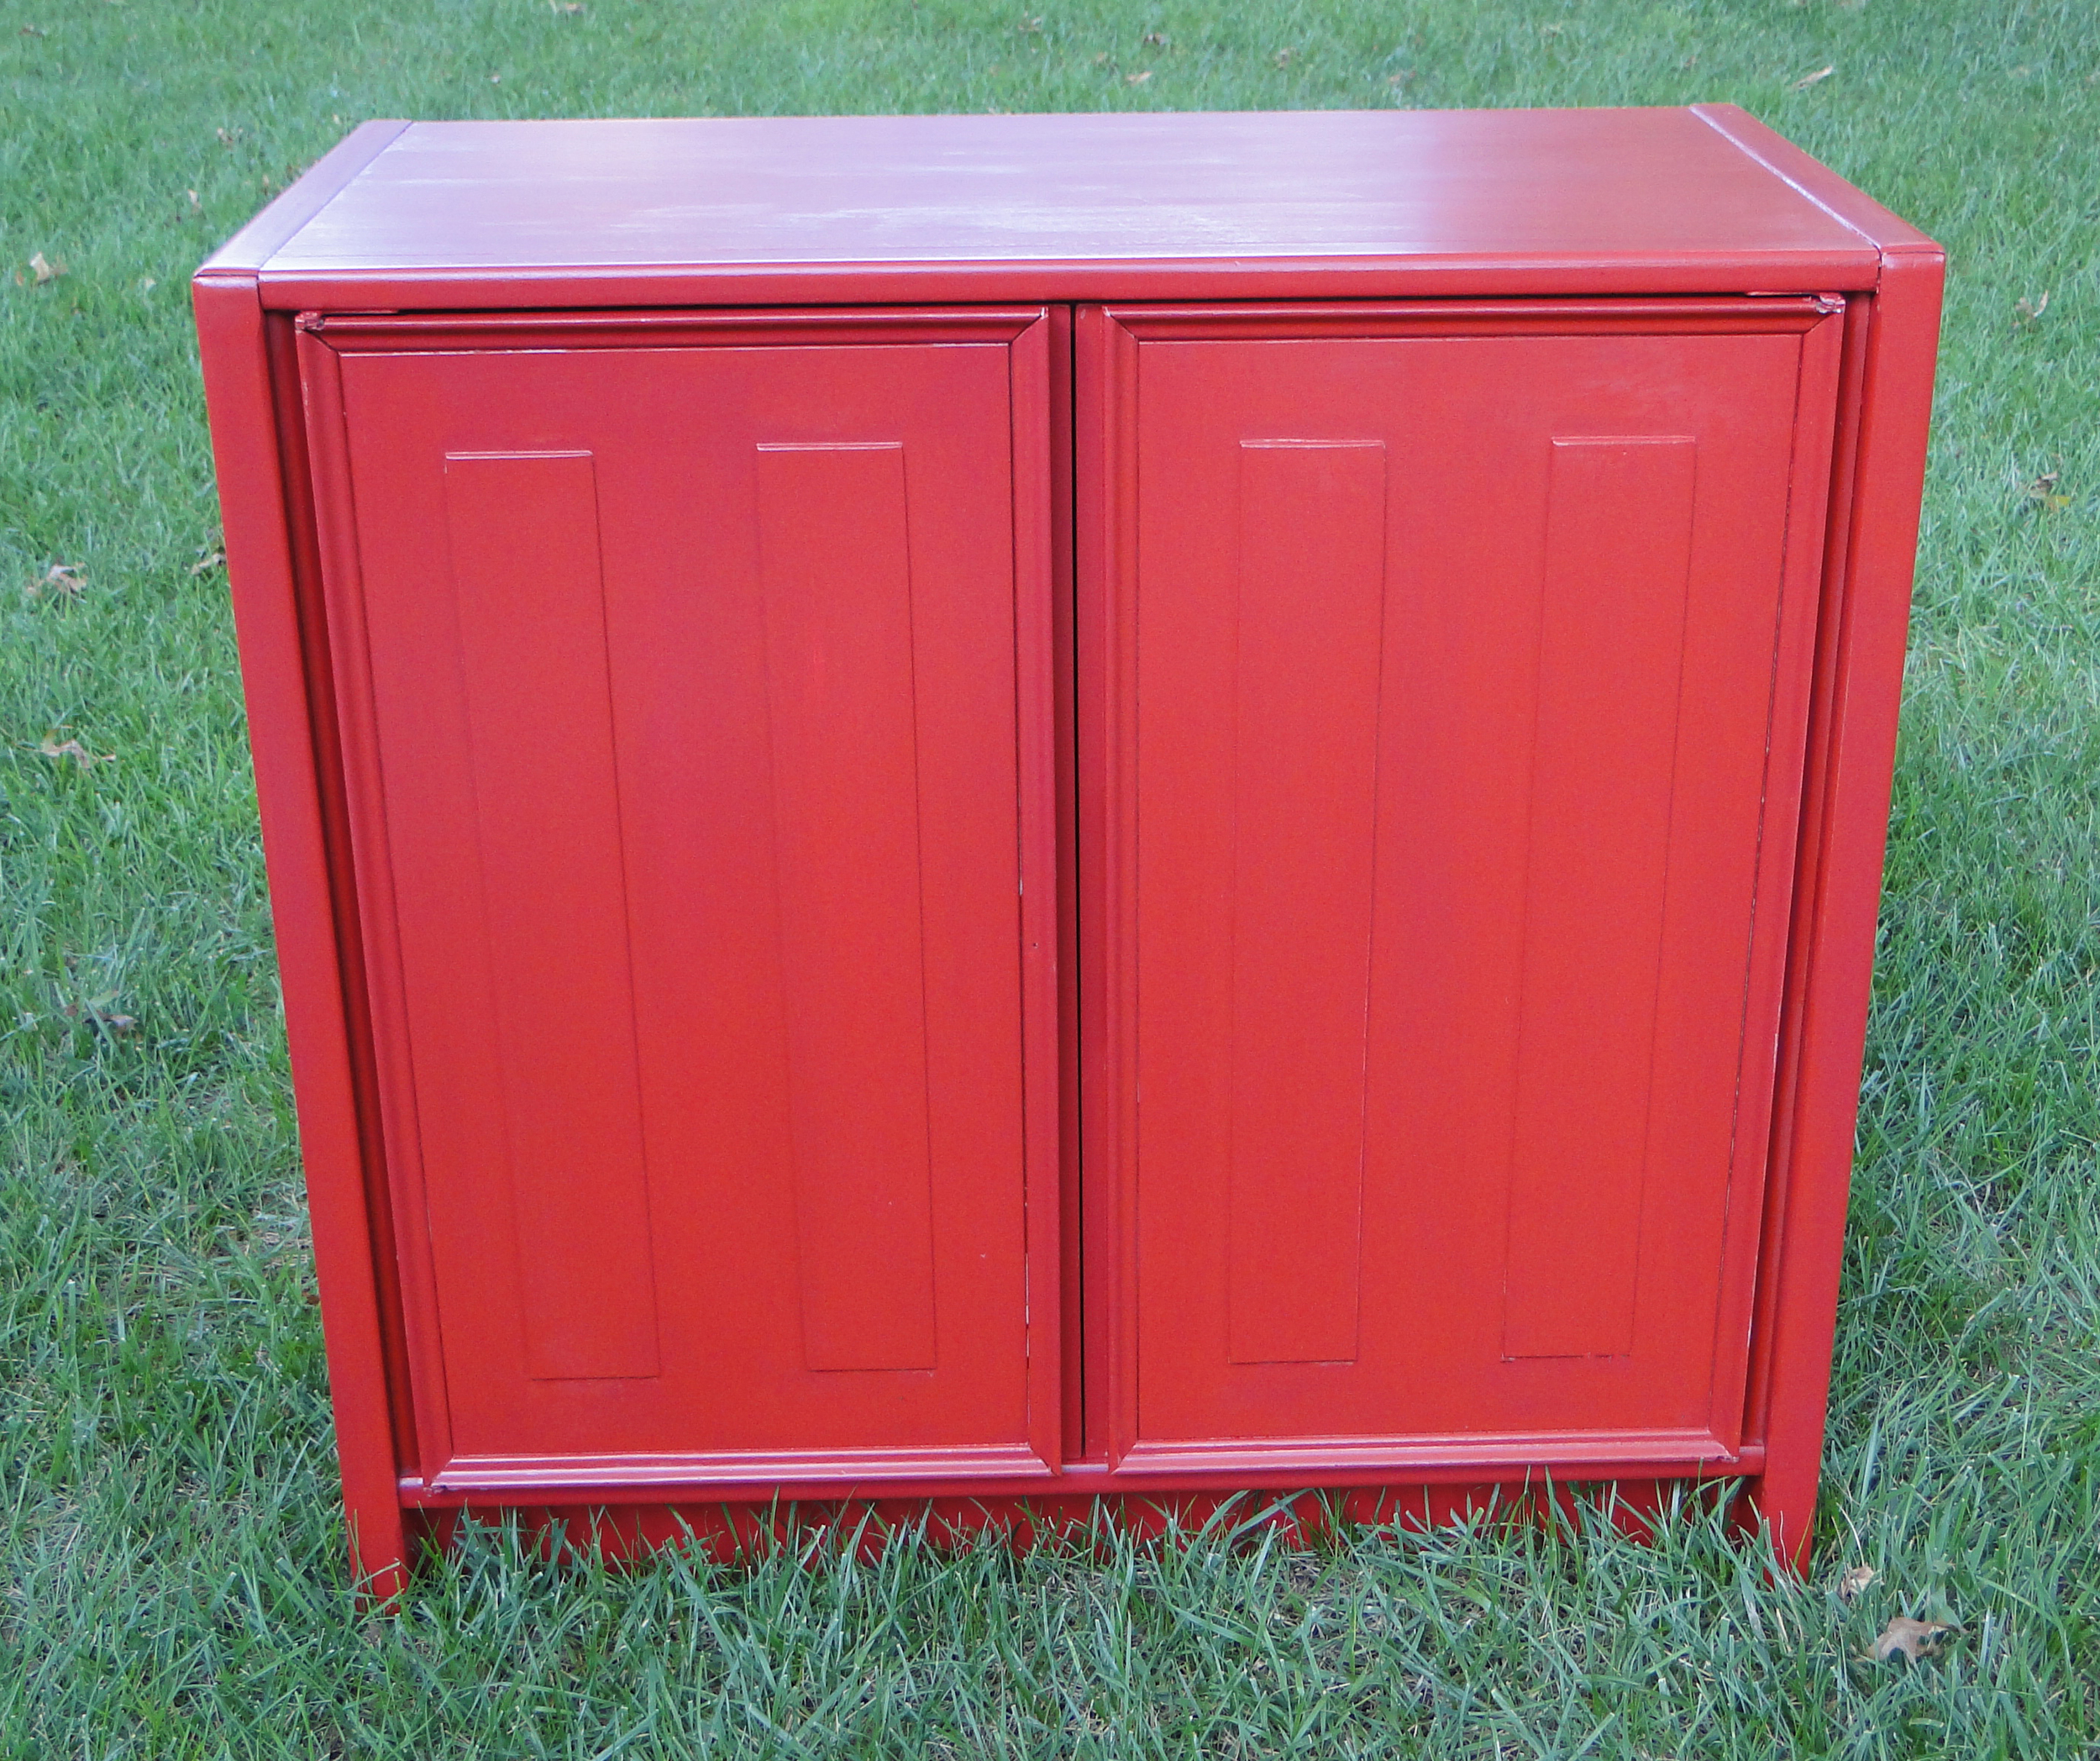 "After" photo of painted cabinet